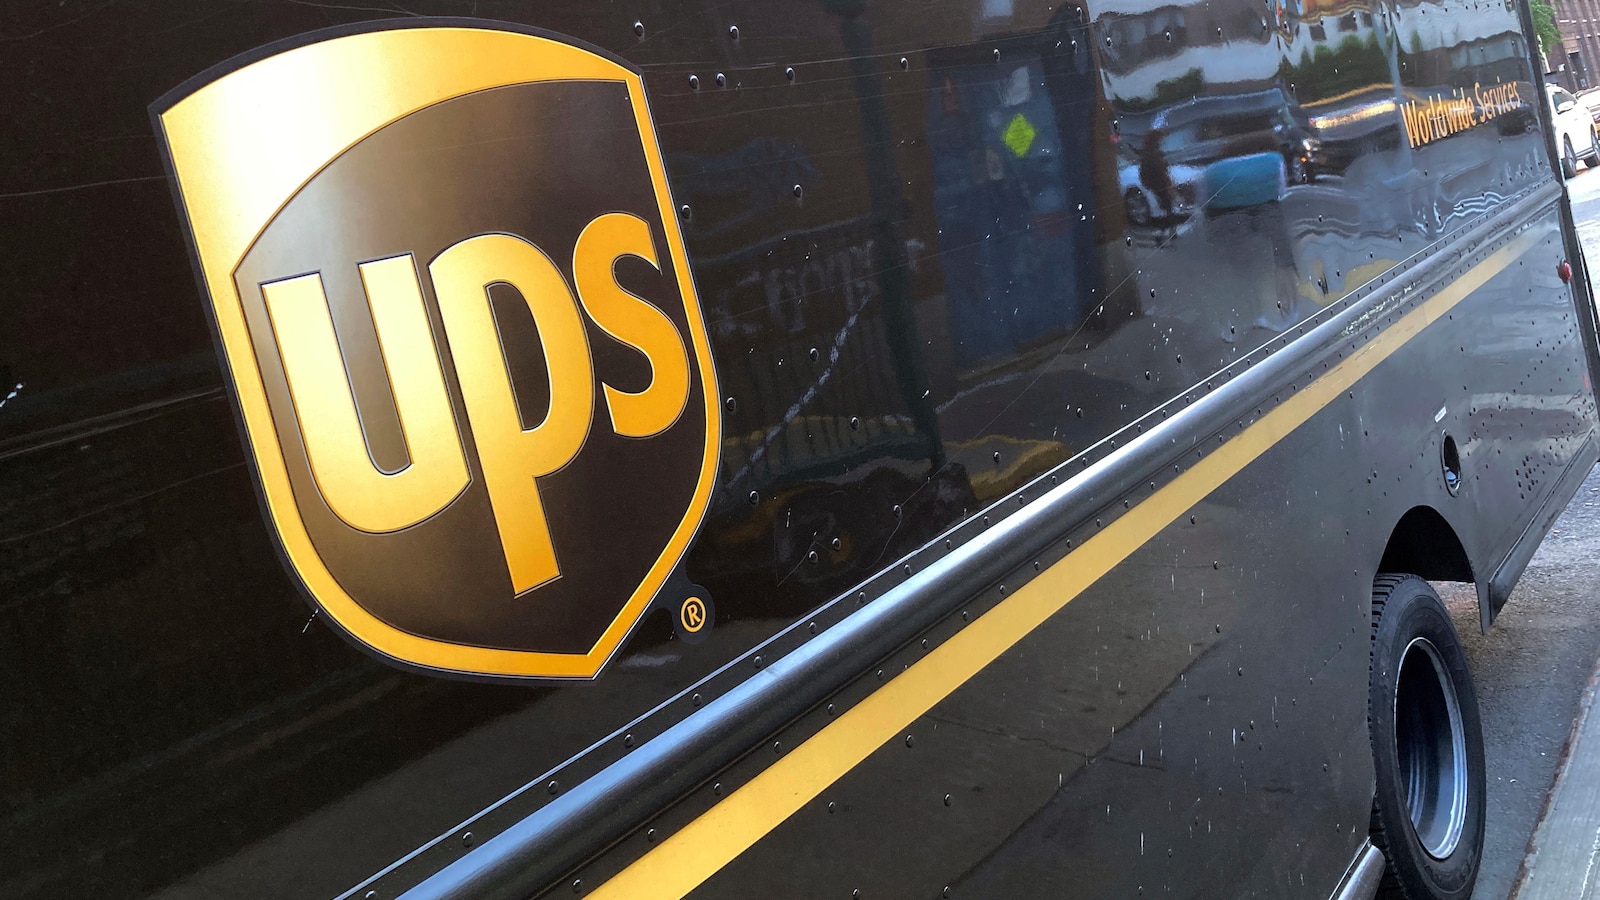 UPS stock decreases ahead of market opening due to announcement of approximately 12,000 job cuts by the company